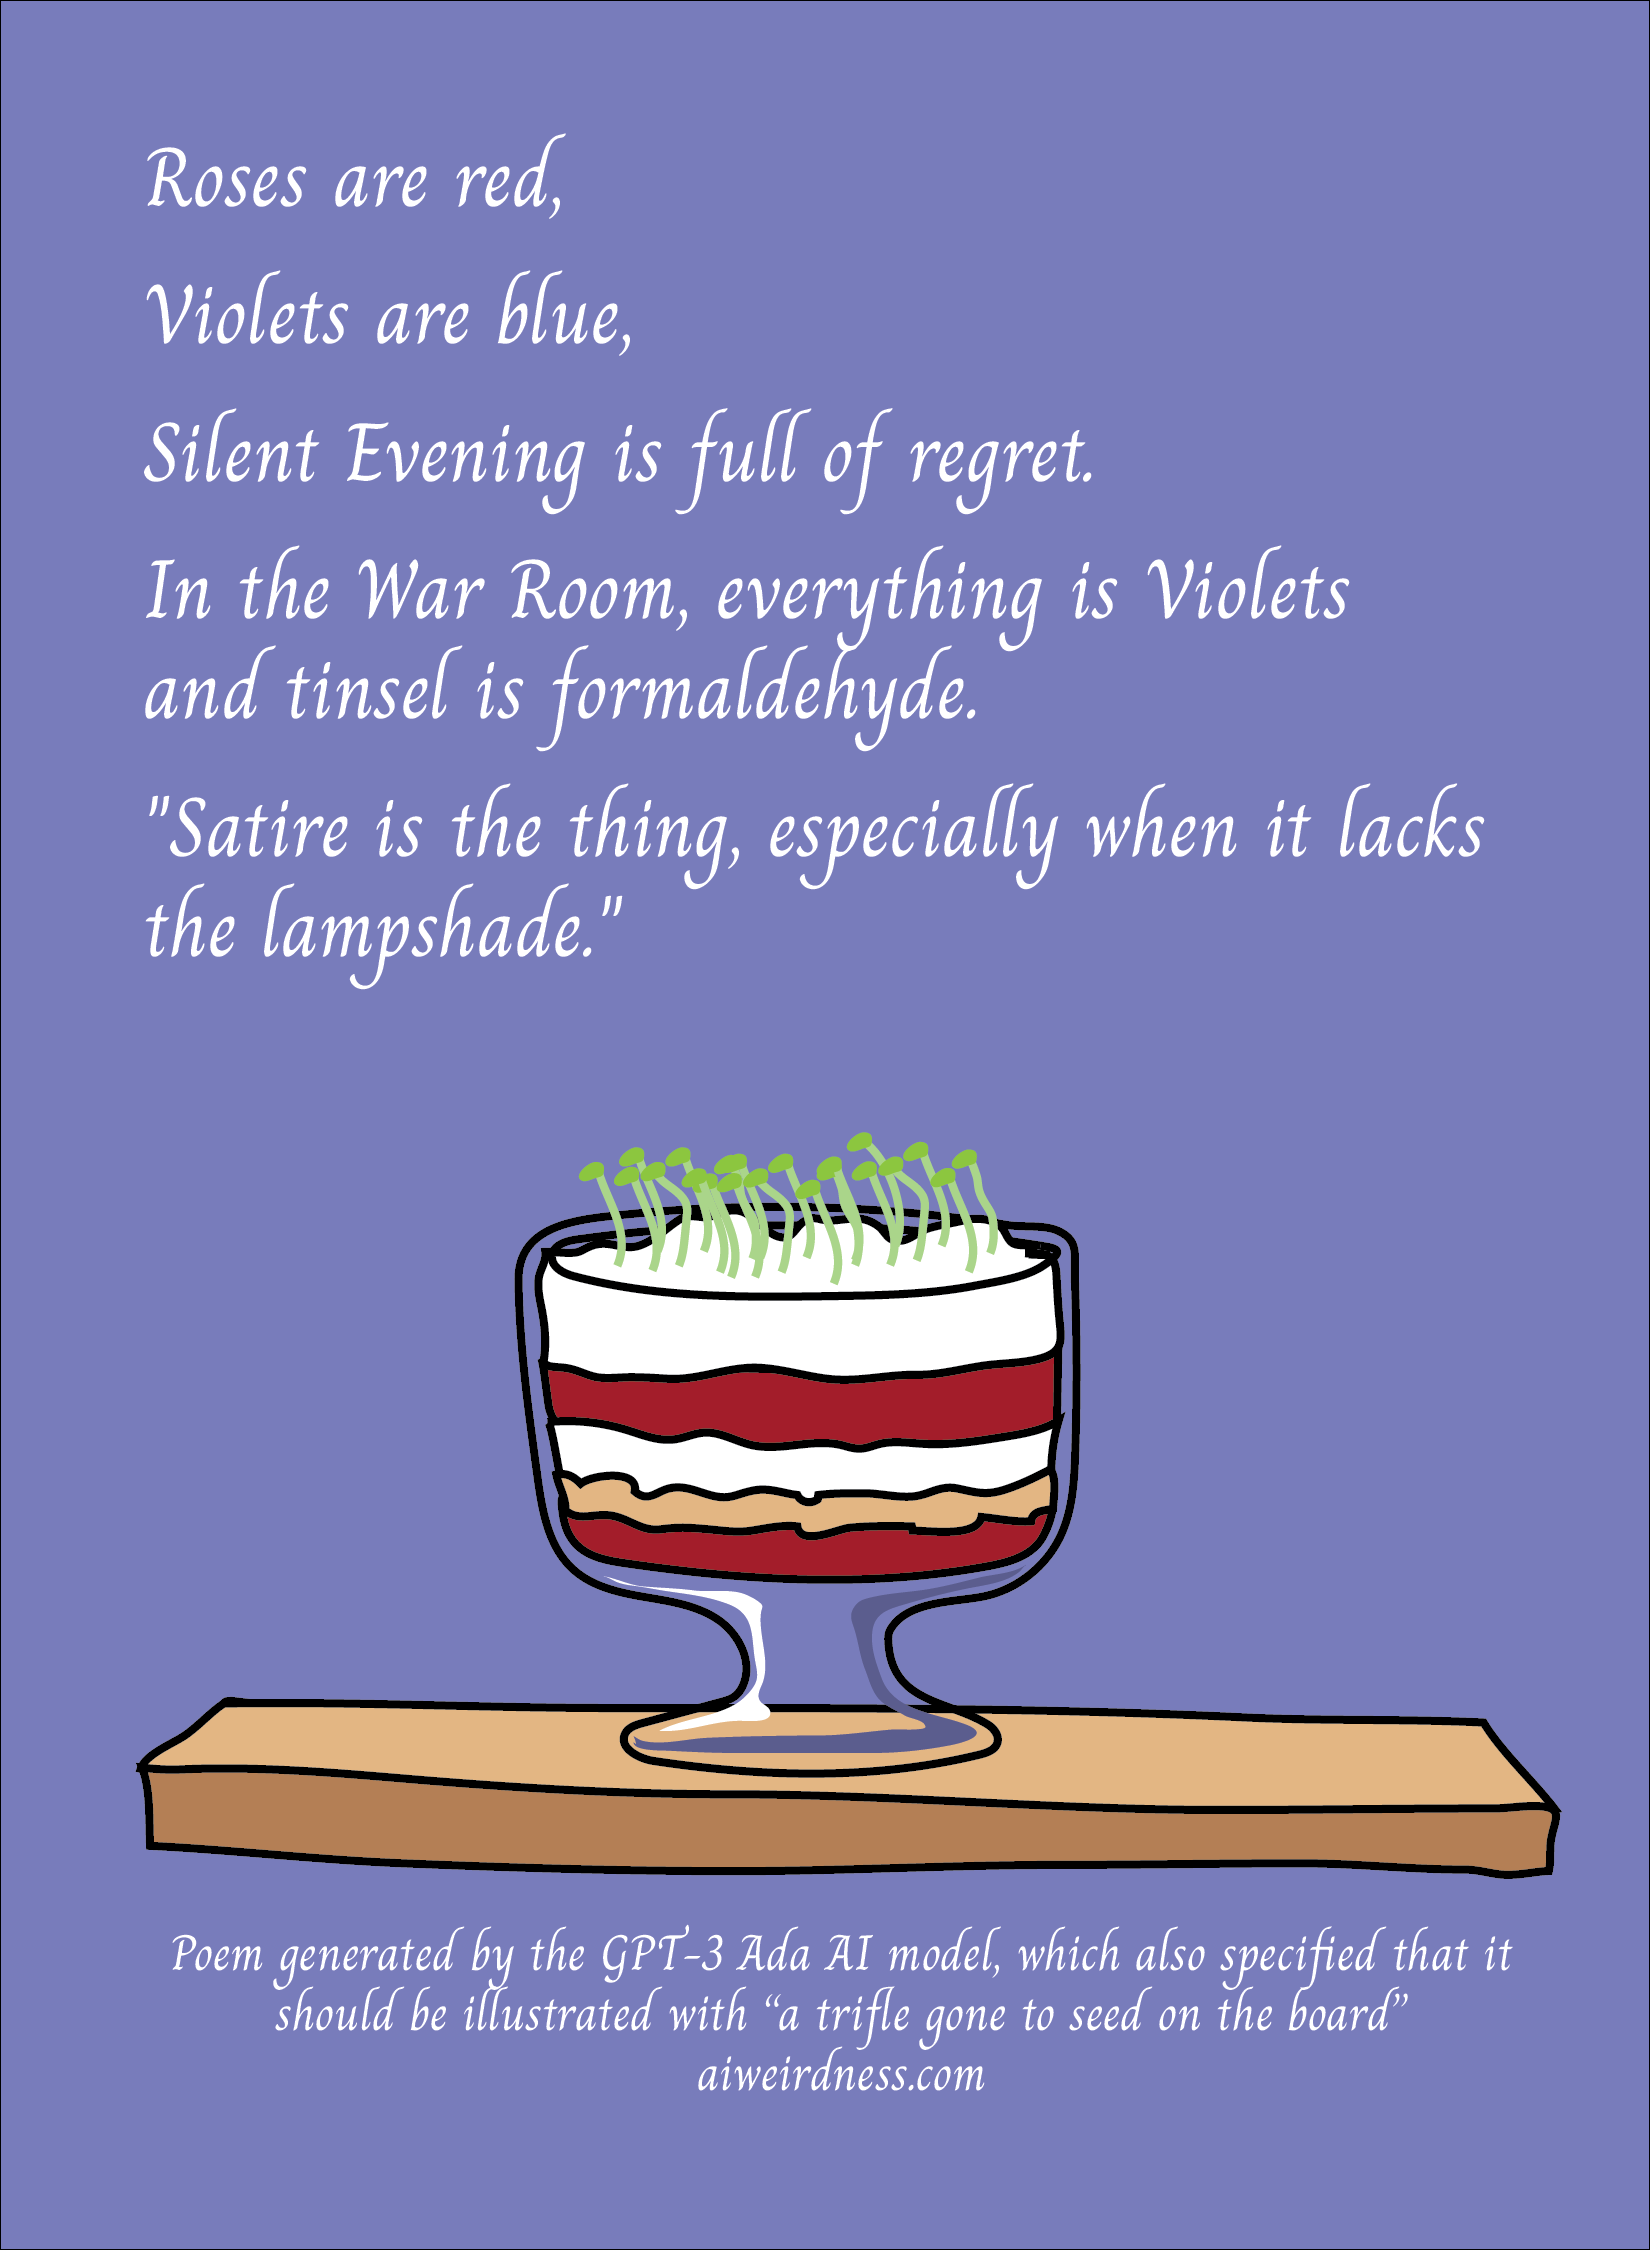 Roses are red, Violets are blue, Silent Evening is full of regret. In the War Room, everything is Violets and tinsel is formaldehyde. 